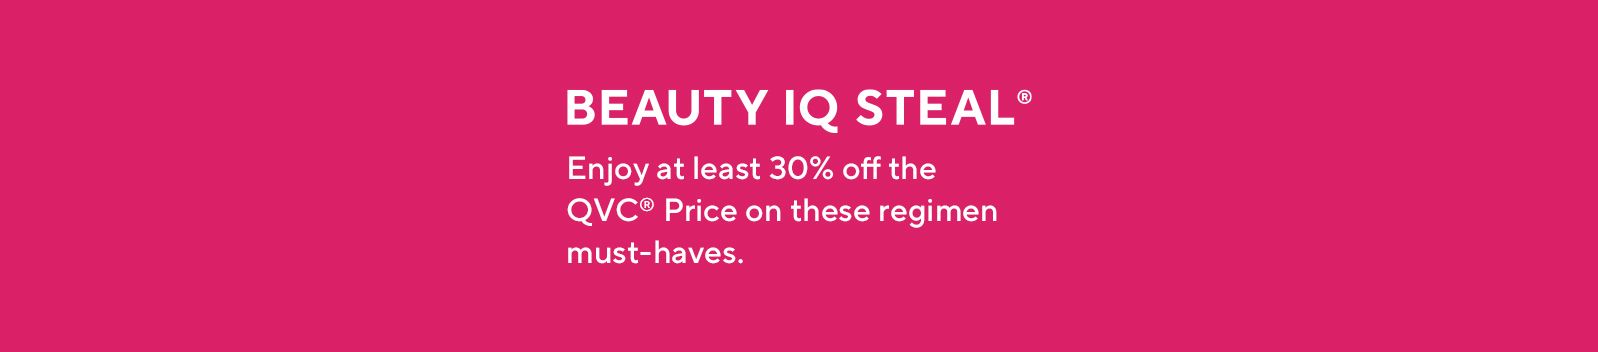 Beauty iQ Steal®  Enjoy at least 30% off the QVC® Price on these regimen must-haves for a limited time.